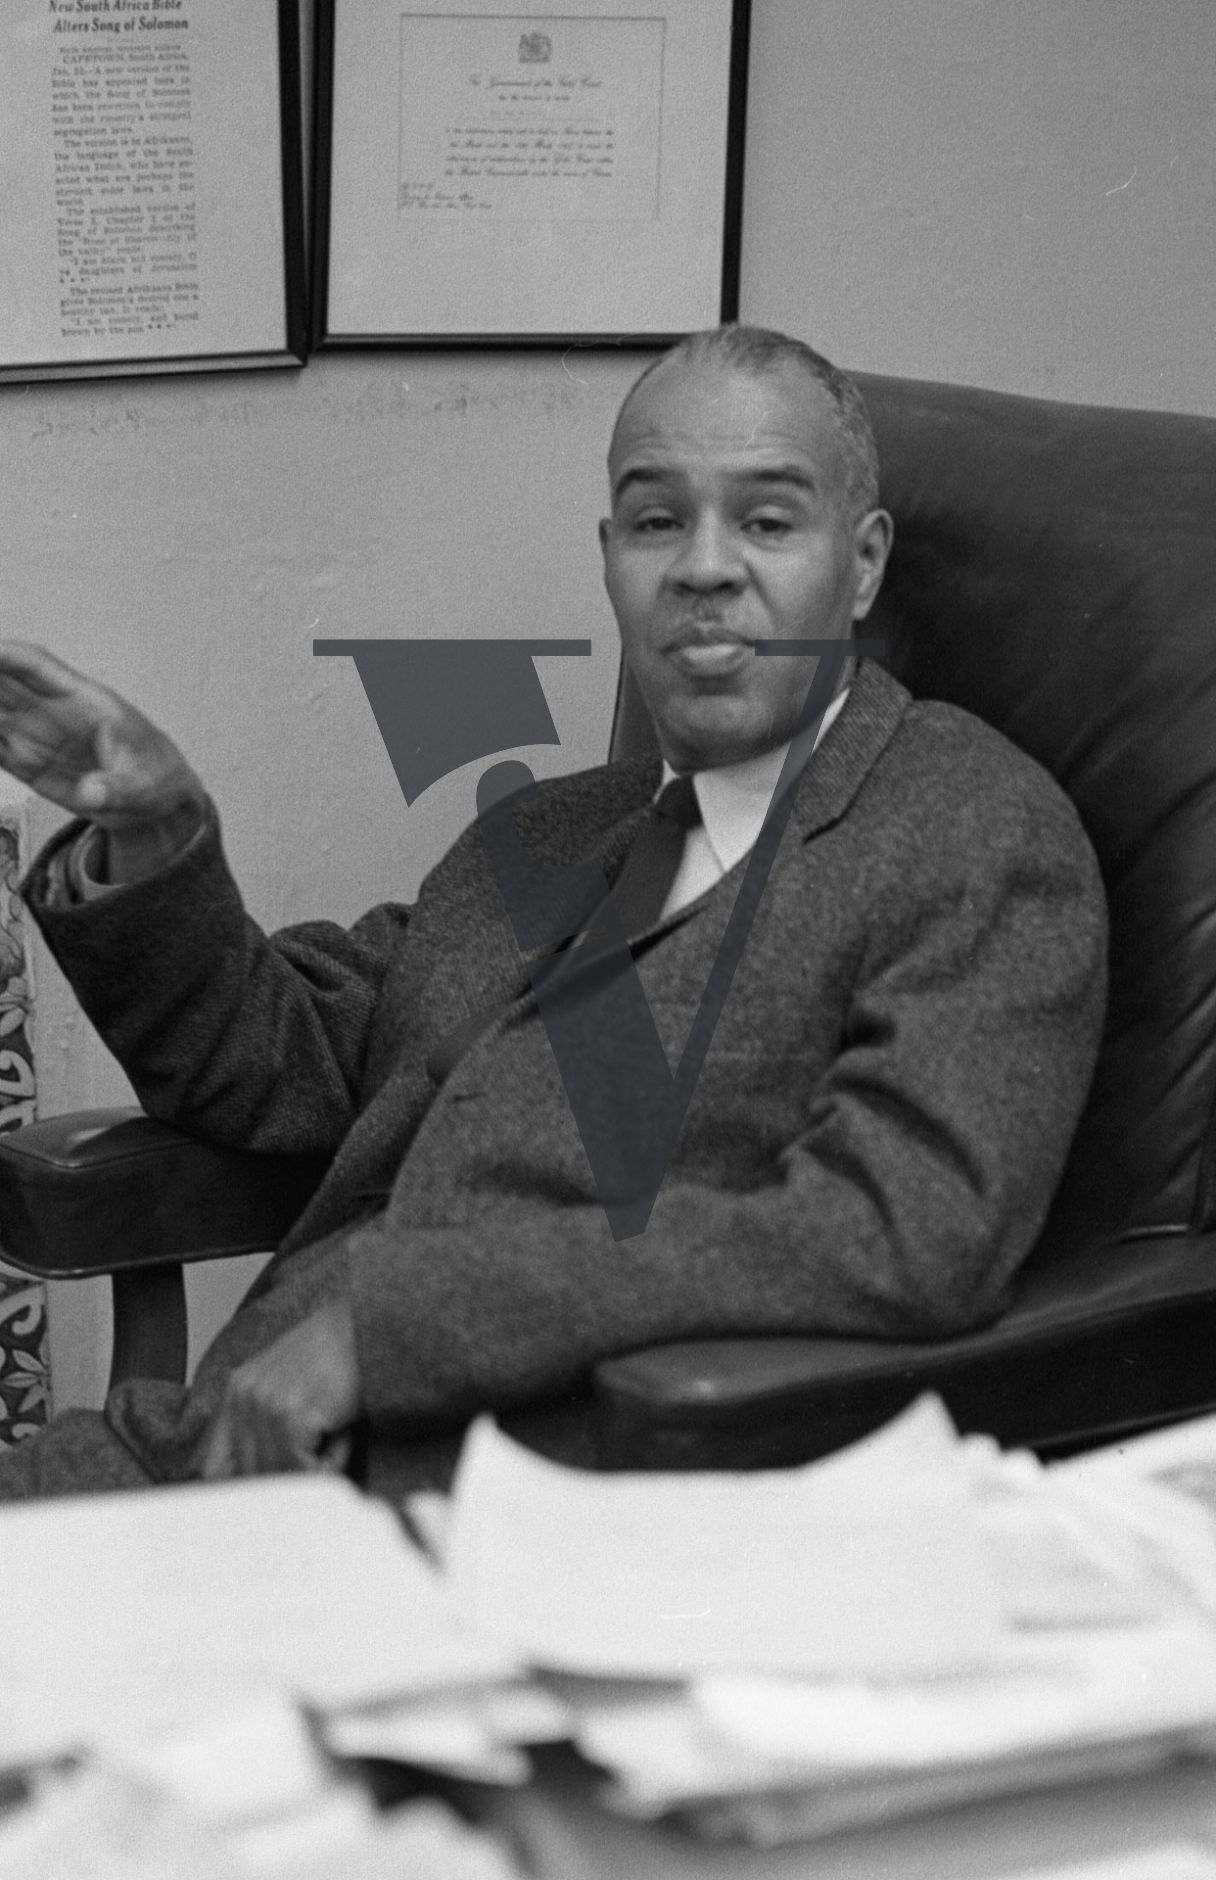 Roy Wilkins, leader, National Association for the Advancement of Colored People, NAACP, portrait, gesturing.